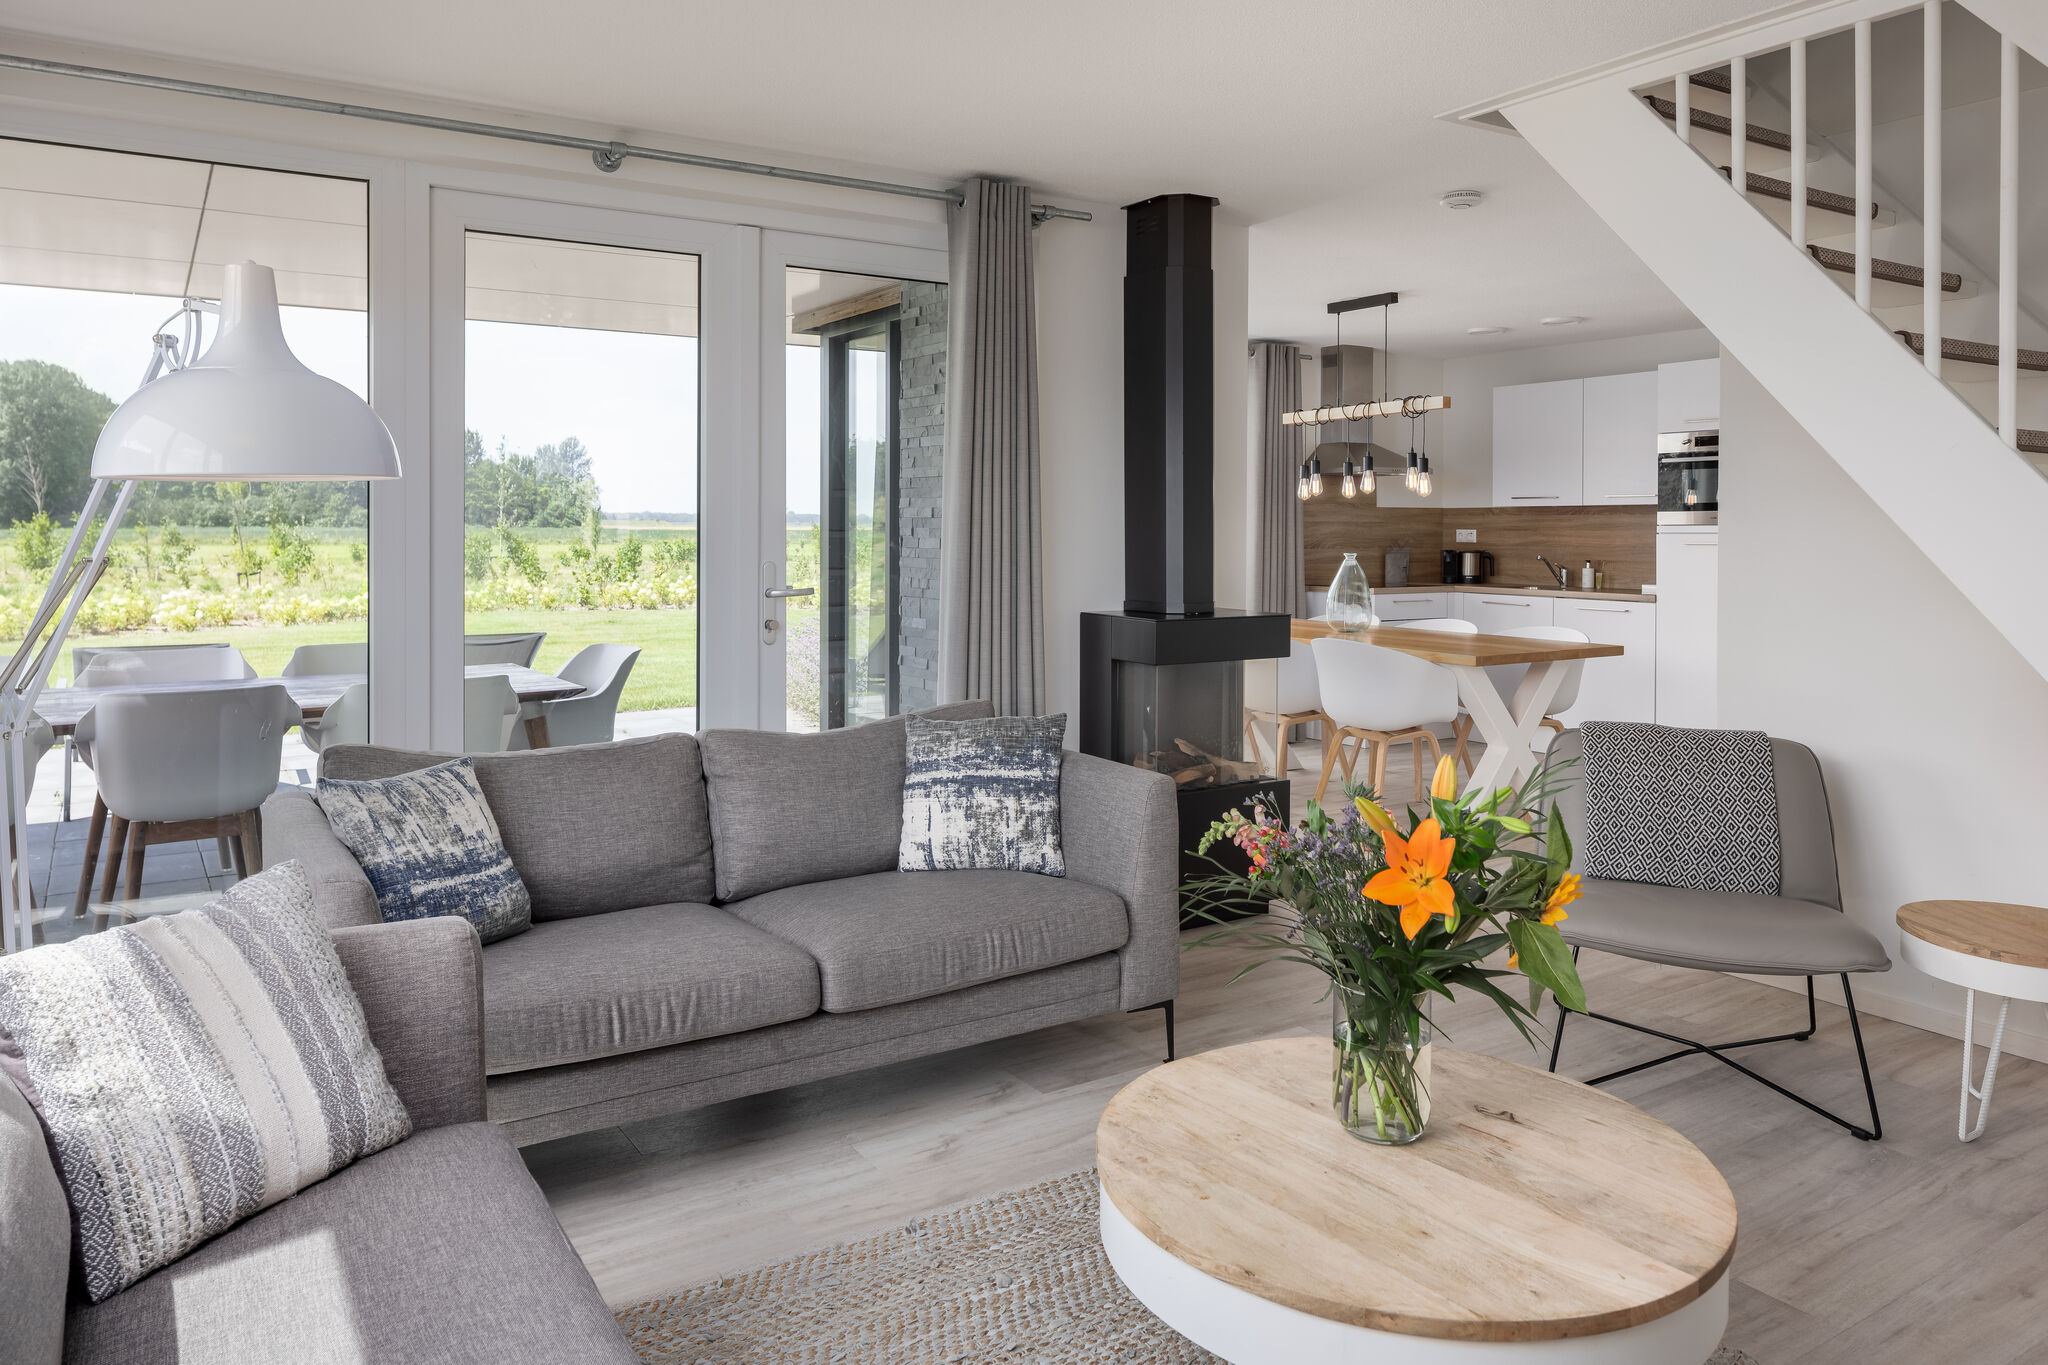 Modern villa with two bathrooms, on a holiday park near the Veerse Meer